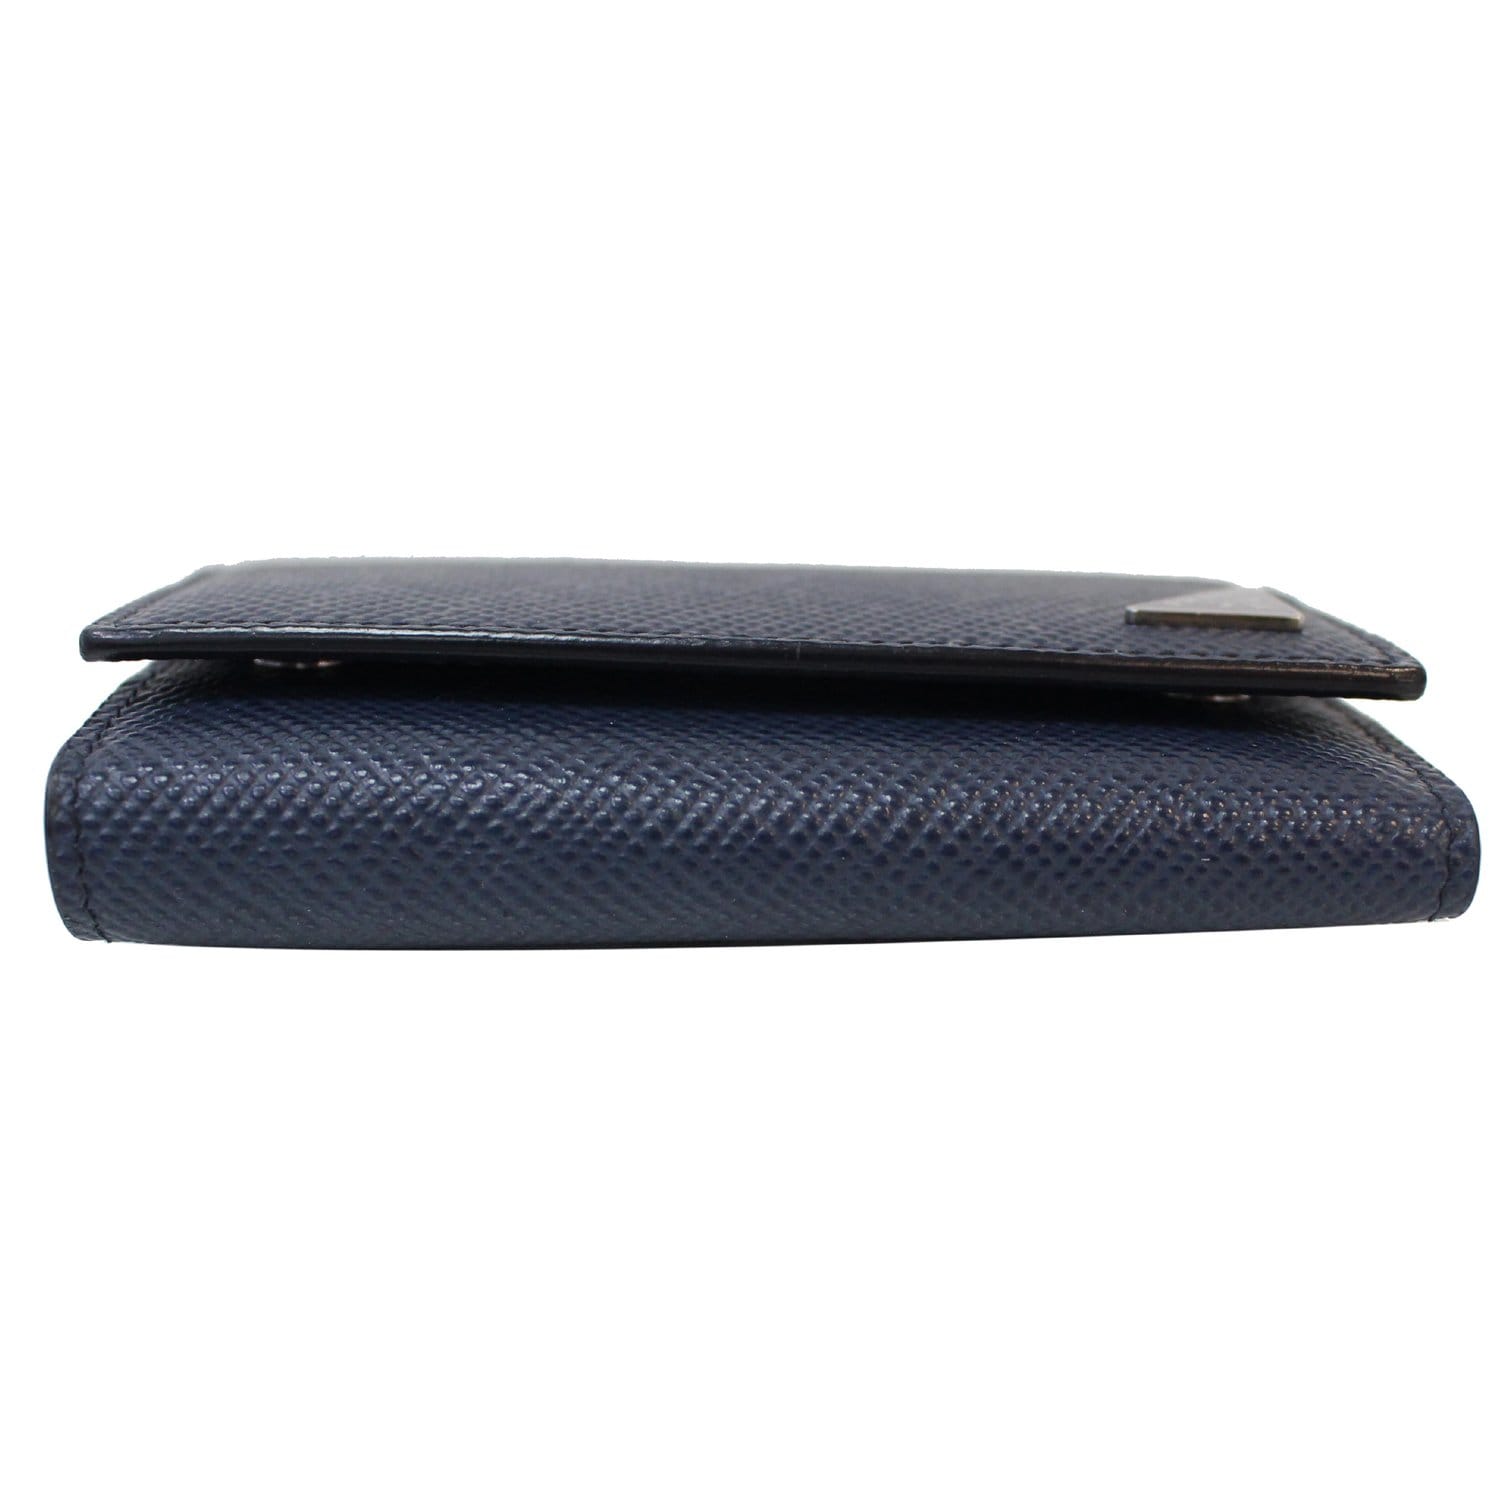 PRADA Navy Blue Leather Card Holder #21994 – ALL YOUR BLISS